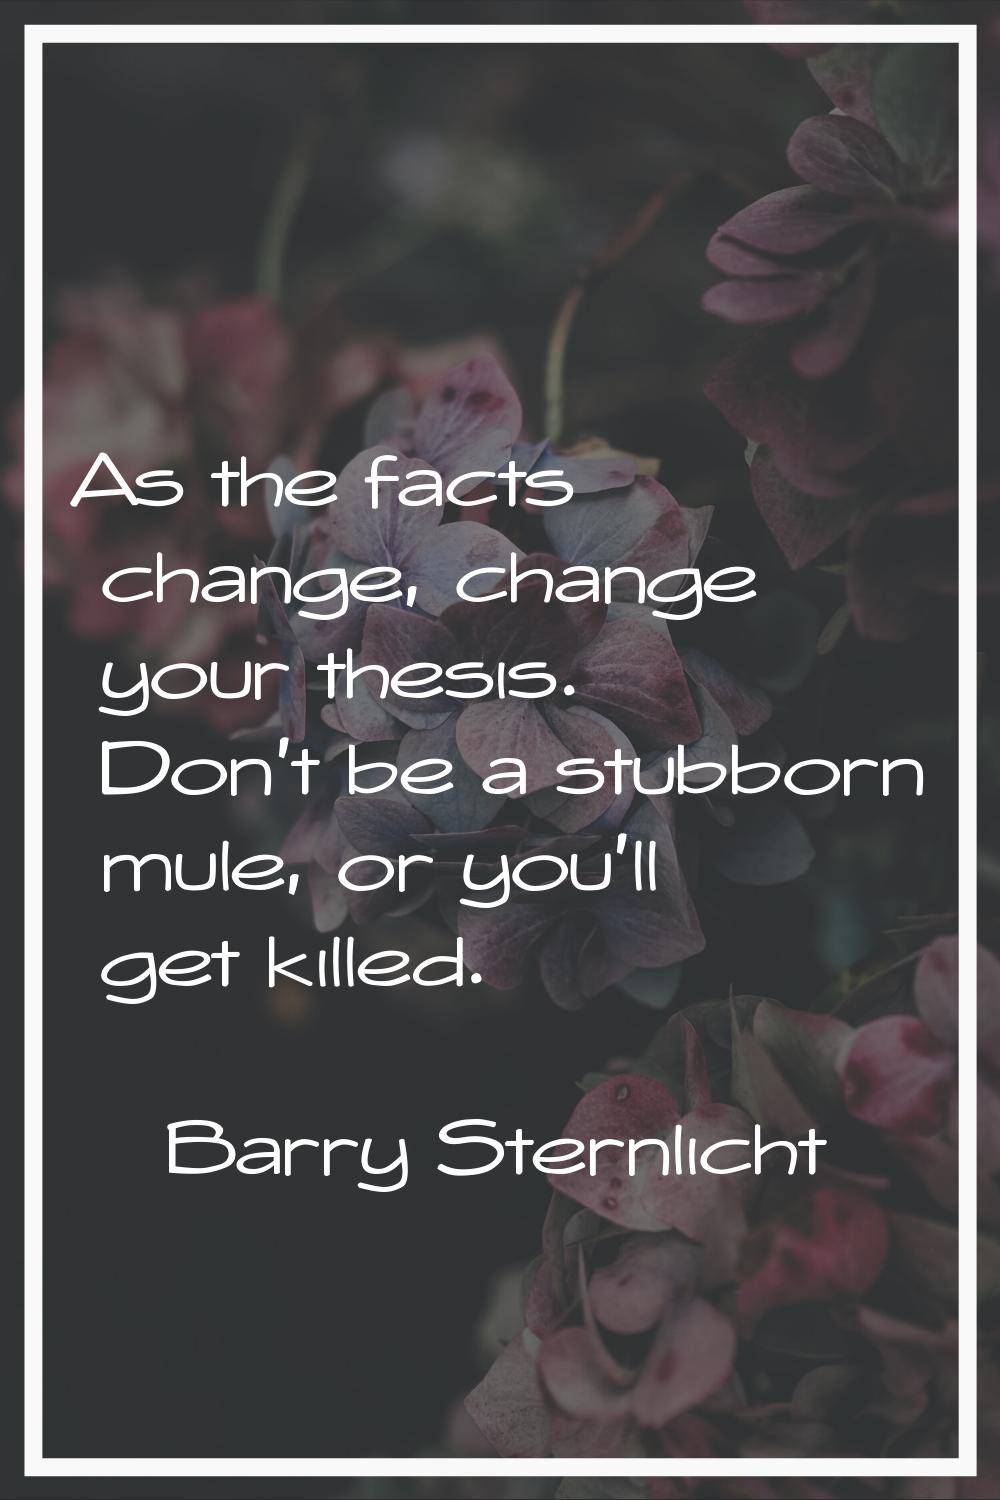 As the facts change, change your thesis. Don't be a stubborn mule, or you'll get killed.